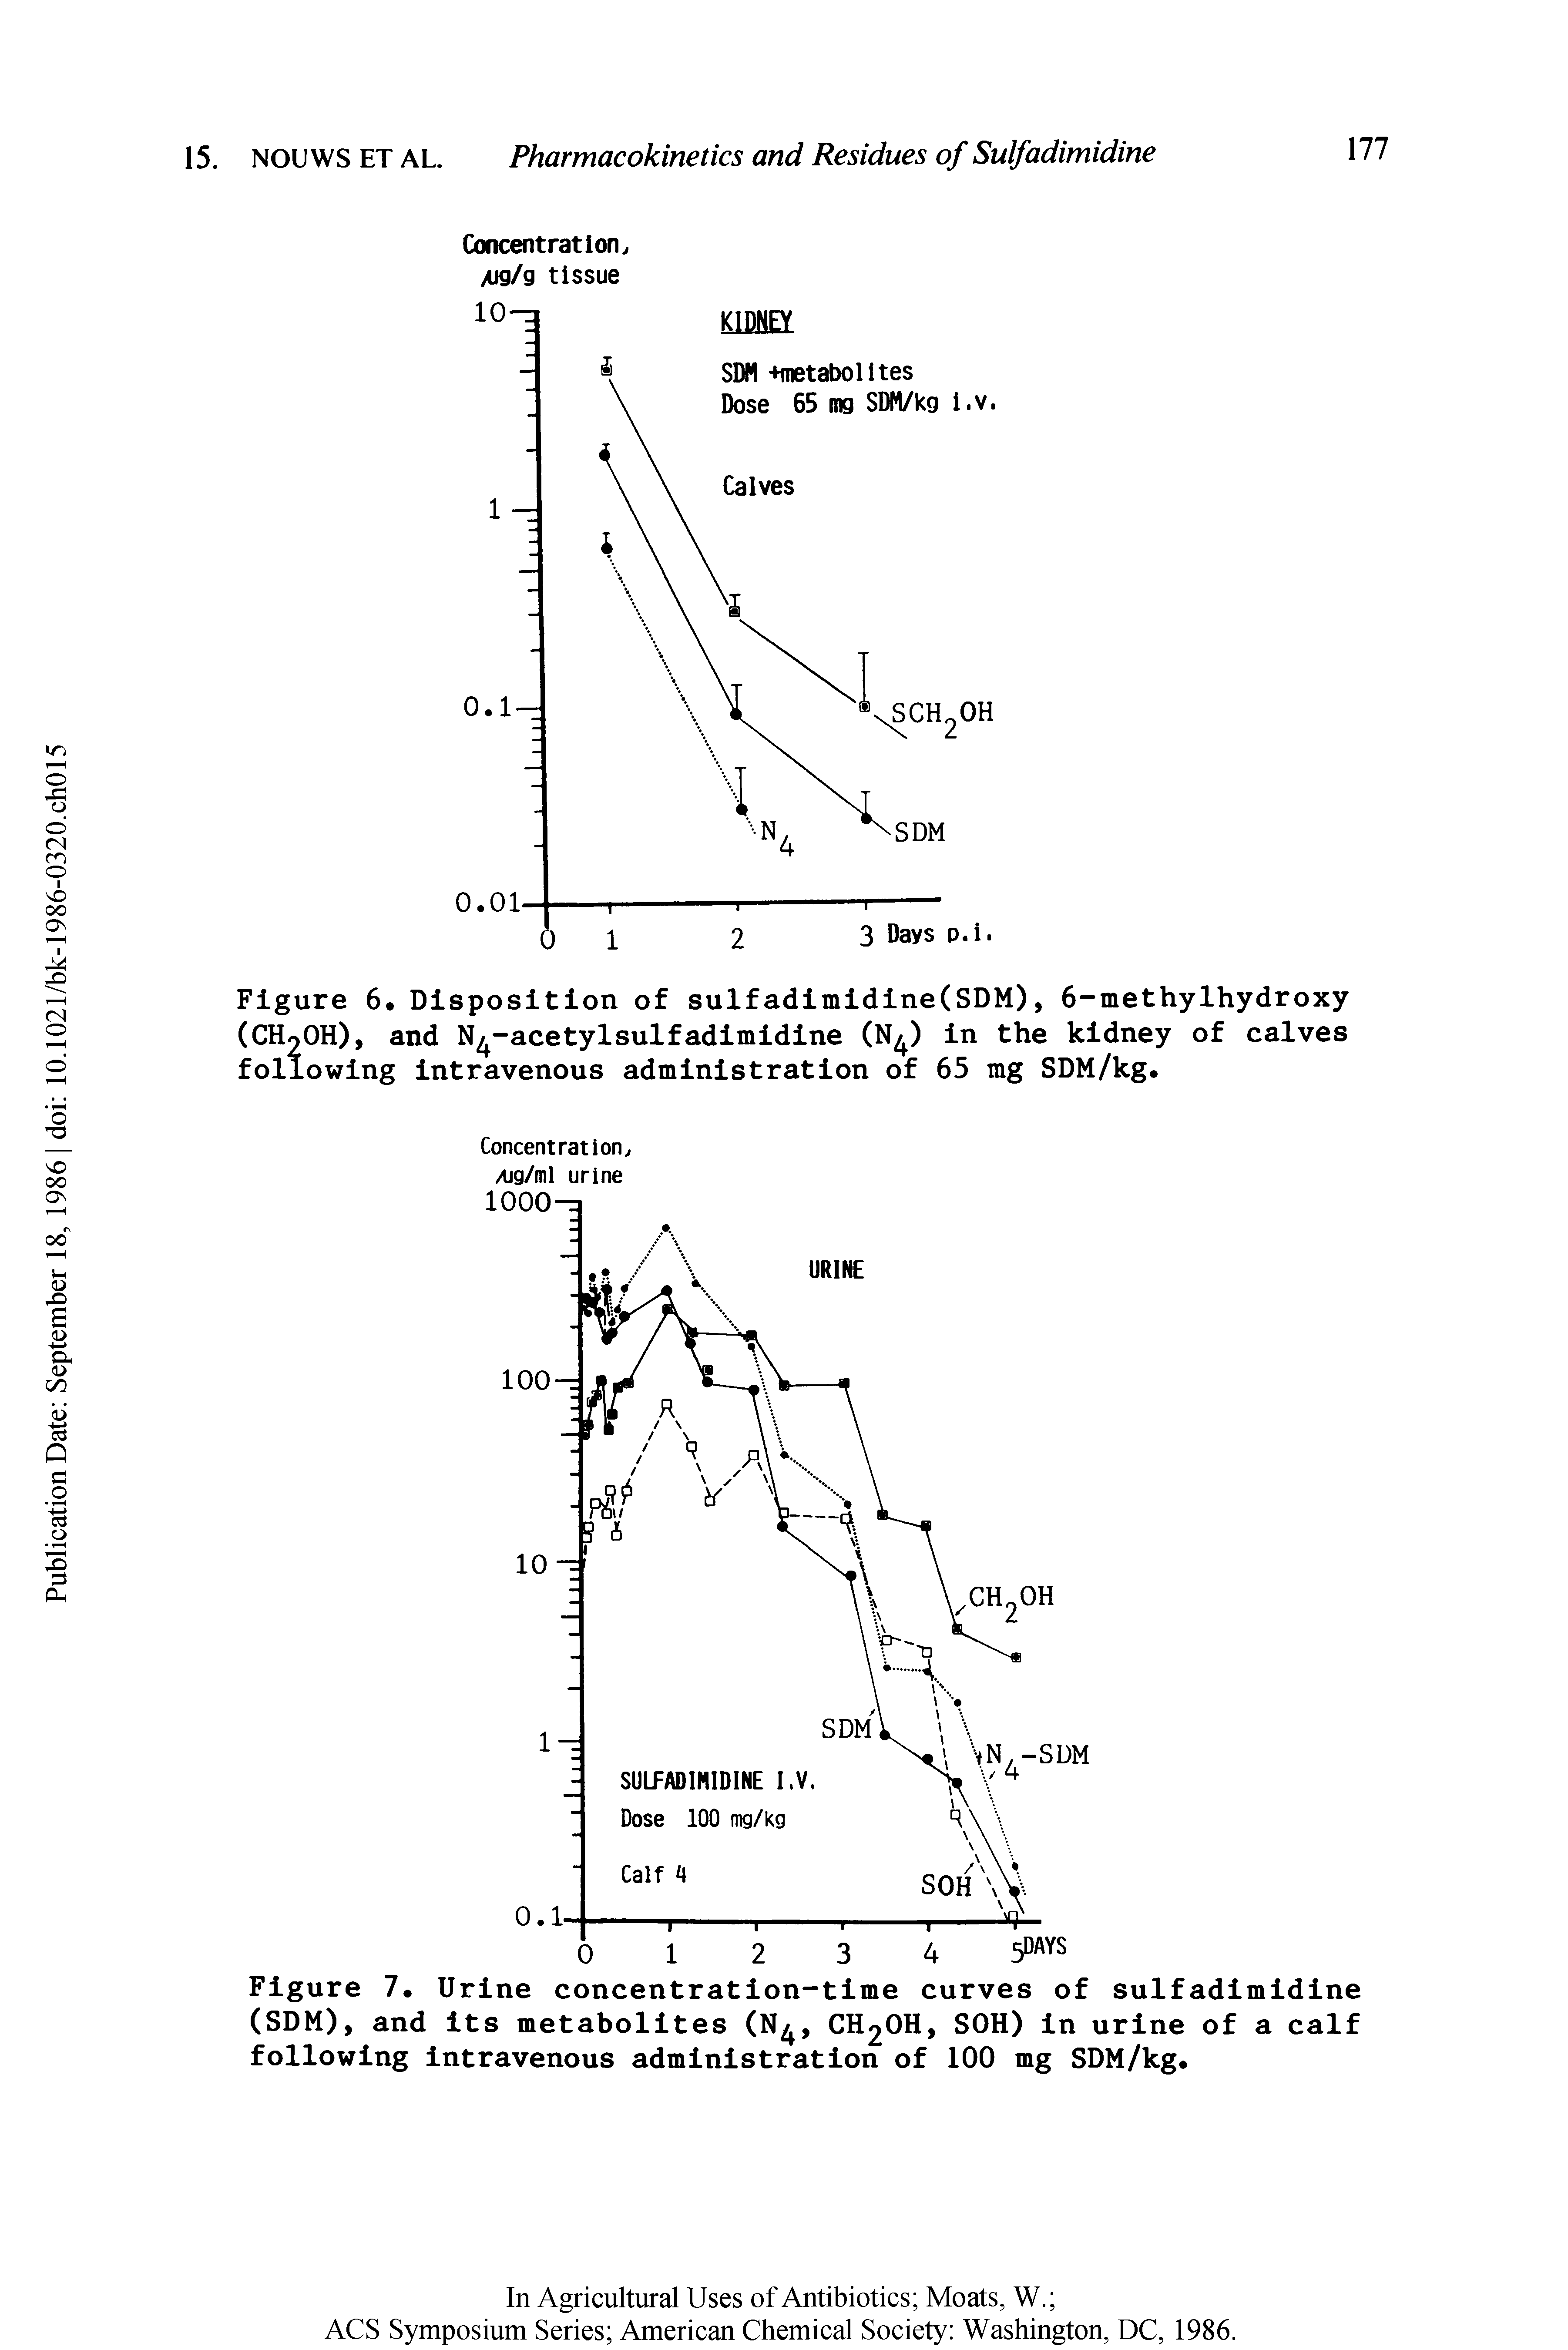 Figure Urine concentration-time curves of sulfadimidine (SDM), and its metabolites (N, CH2OH, SOH) in urine of a calf following intravenous administration of 100 mg SDM/kg.